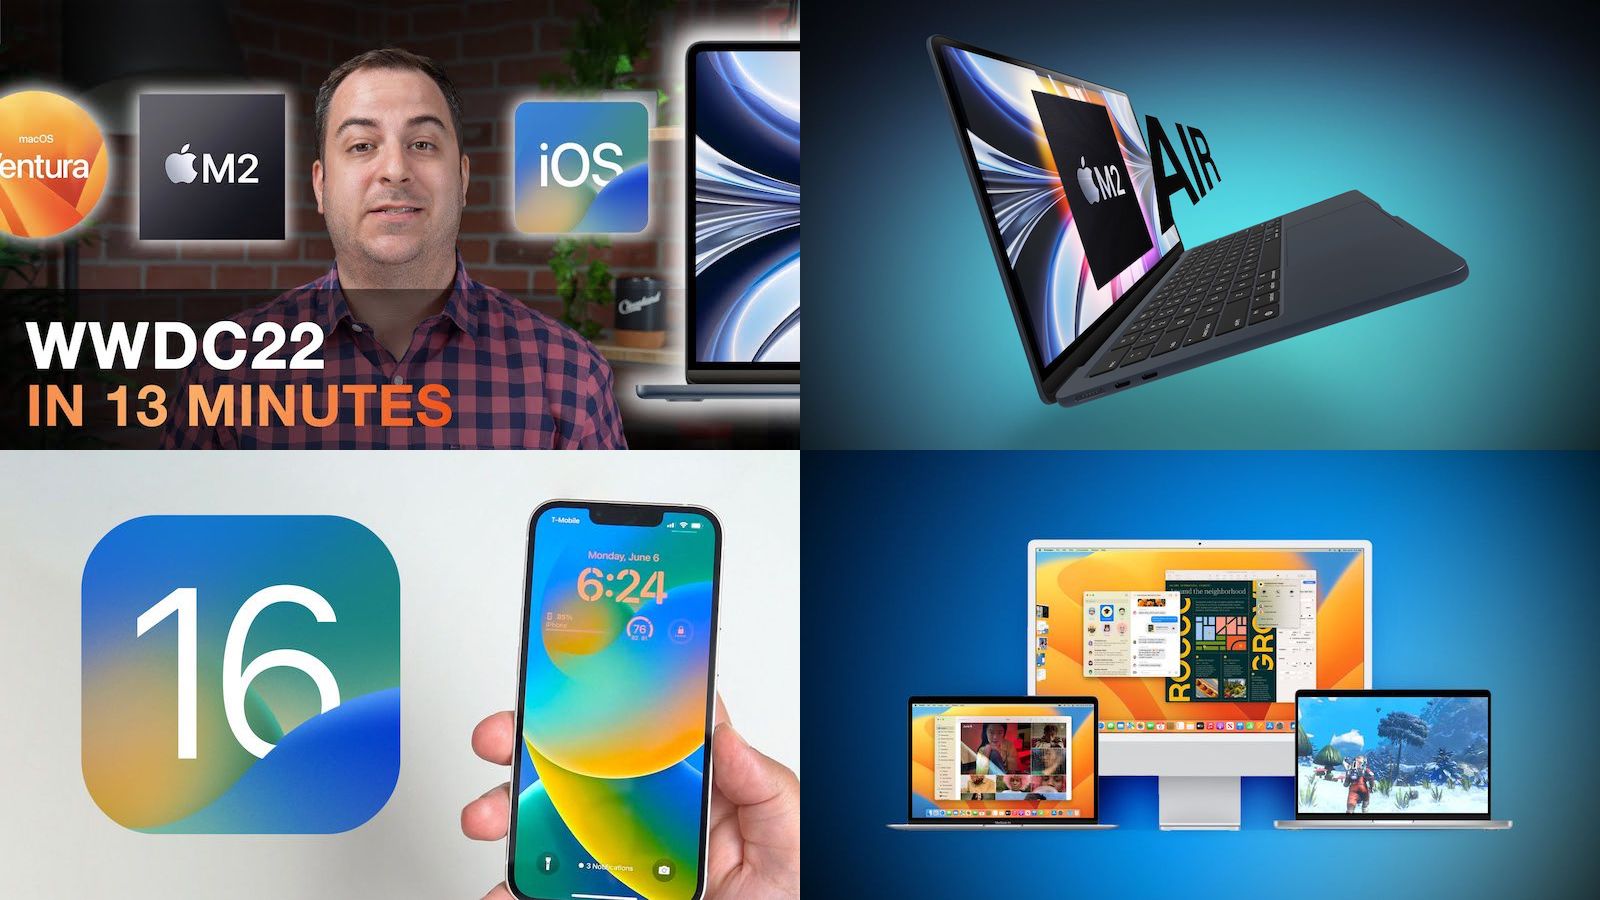 Top Stories: WWDC Recap of iOS 16, New MacBook Air With M2 Chip, and More